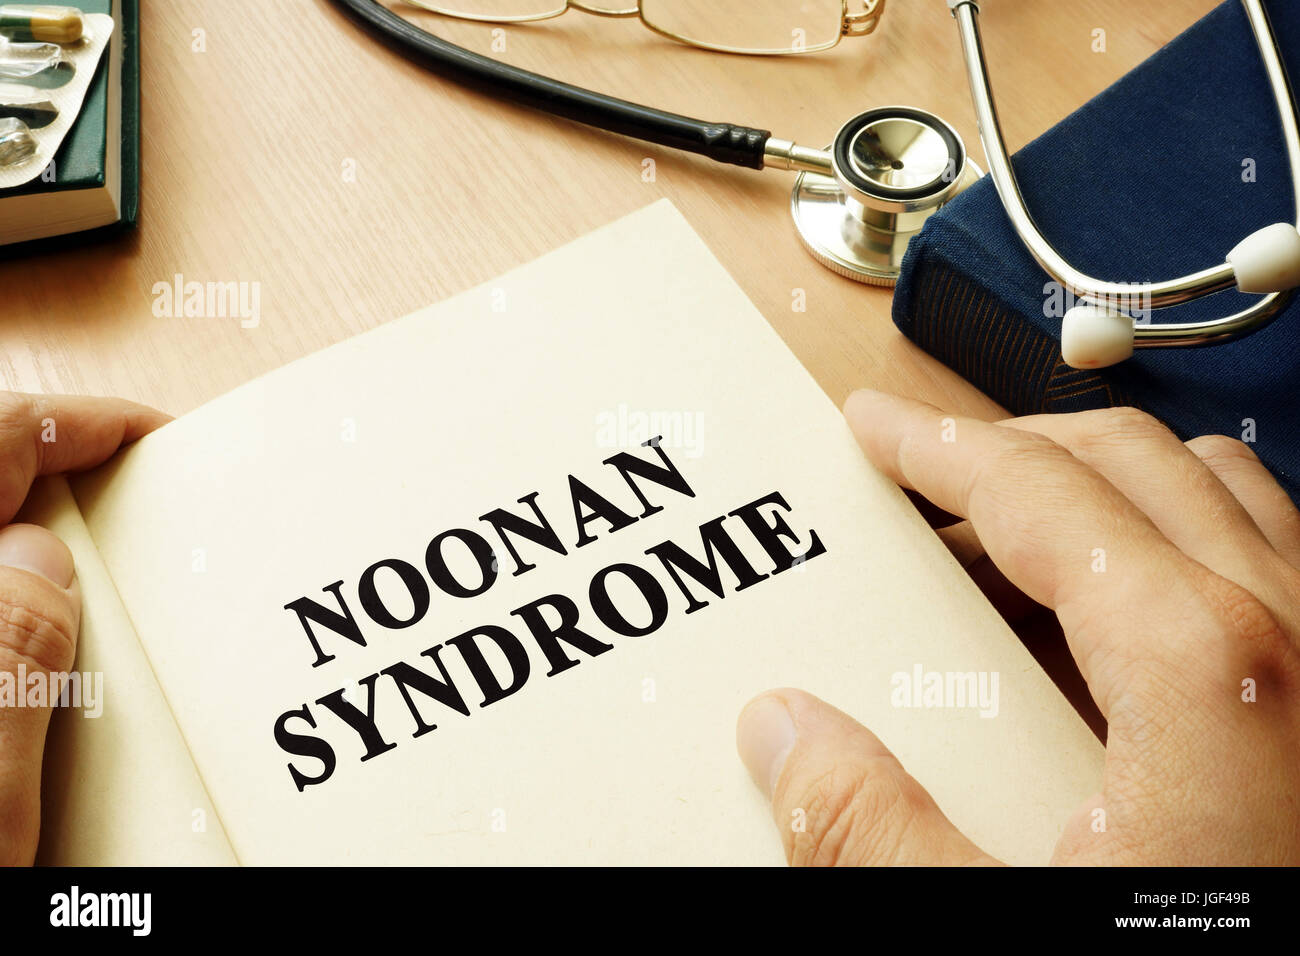 Book with title Noonan Syndrome on a table. Stock Photo